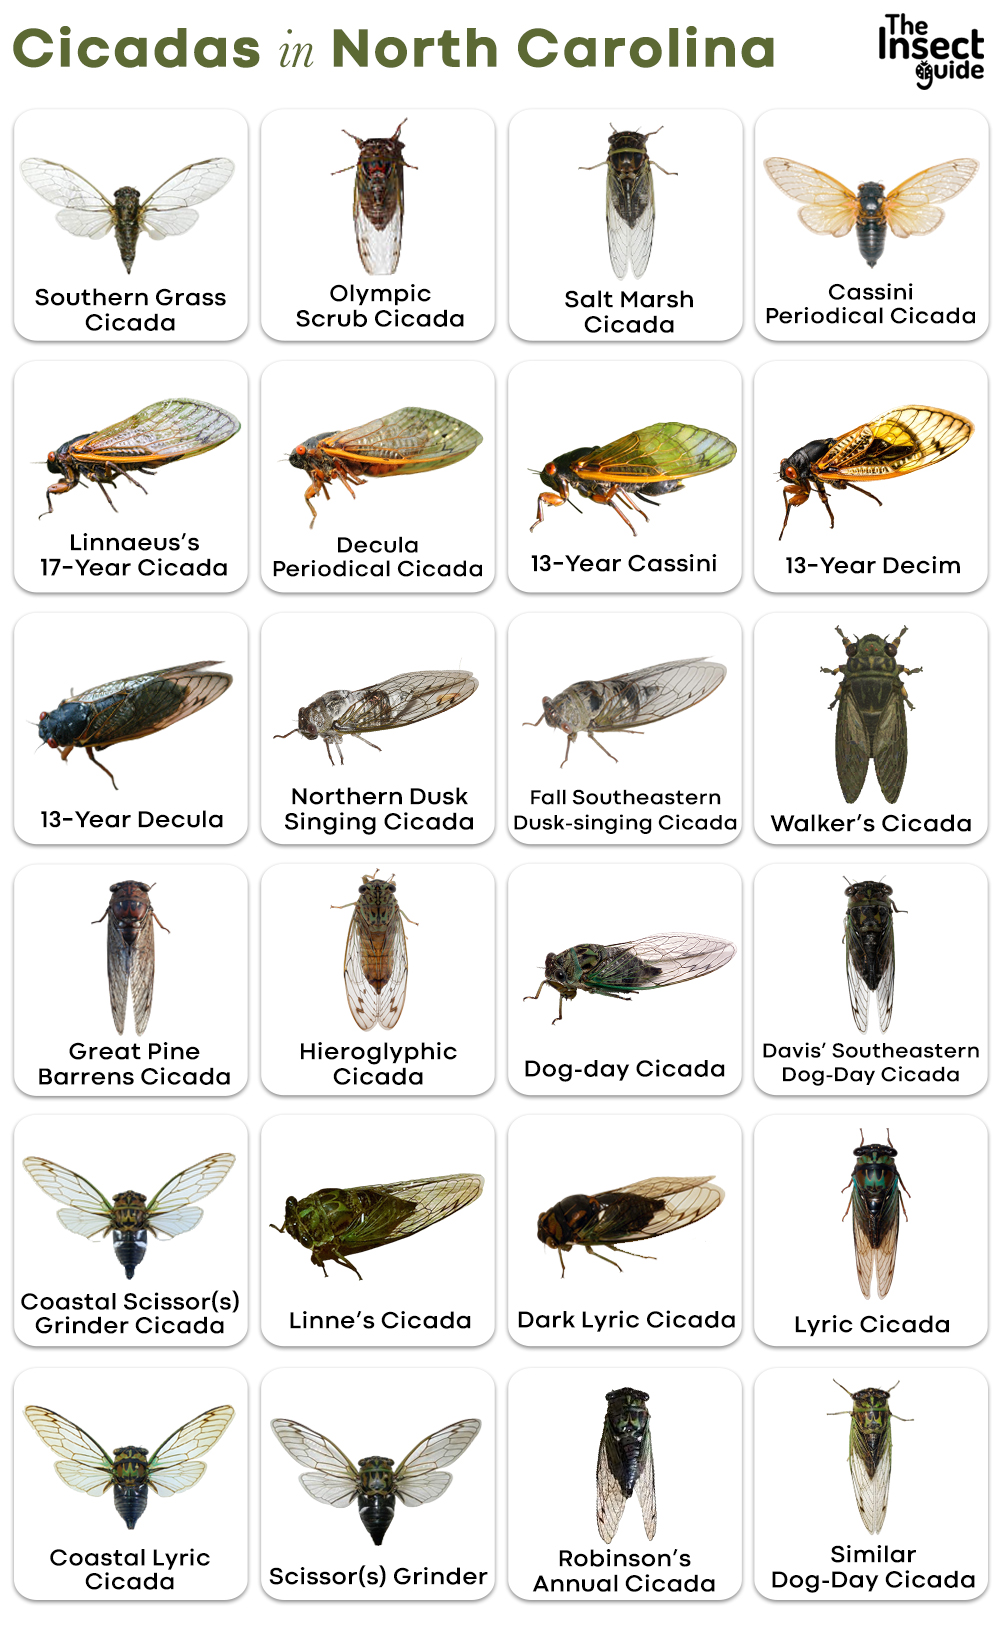 List of Common Types of Cicadas in North Carolina with Pictures